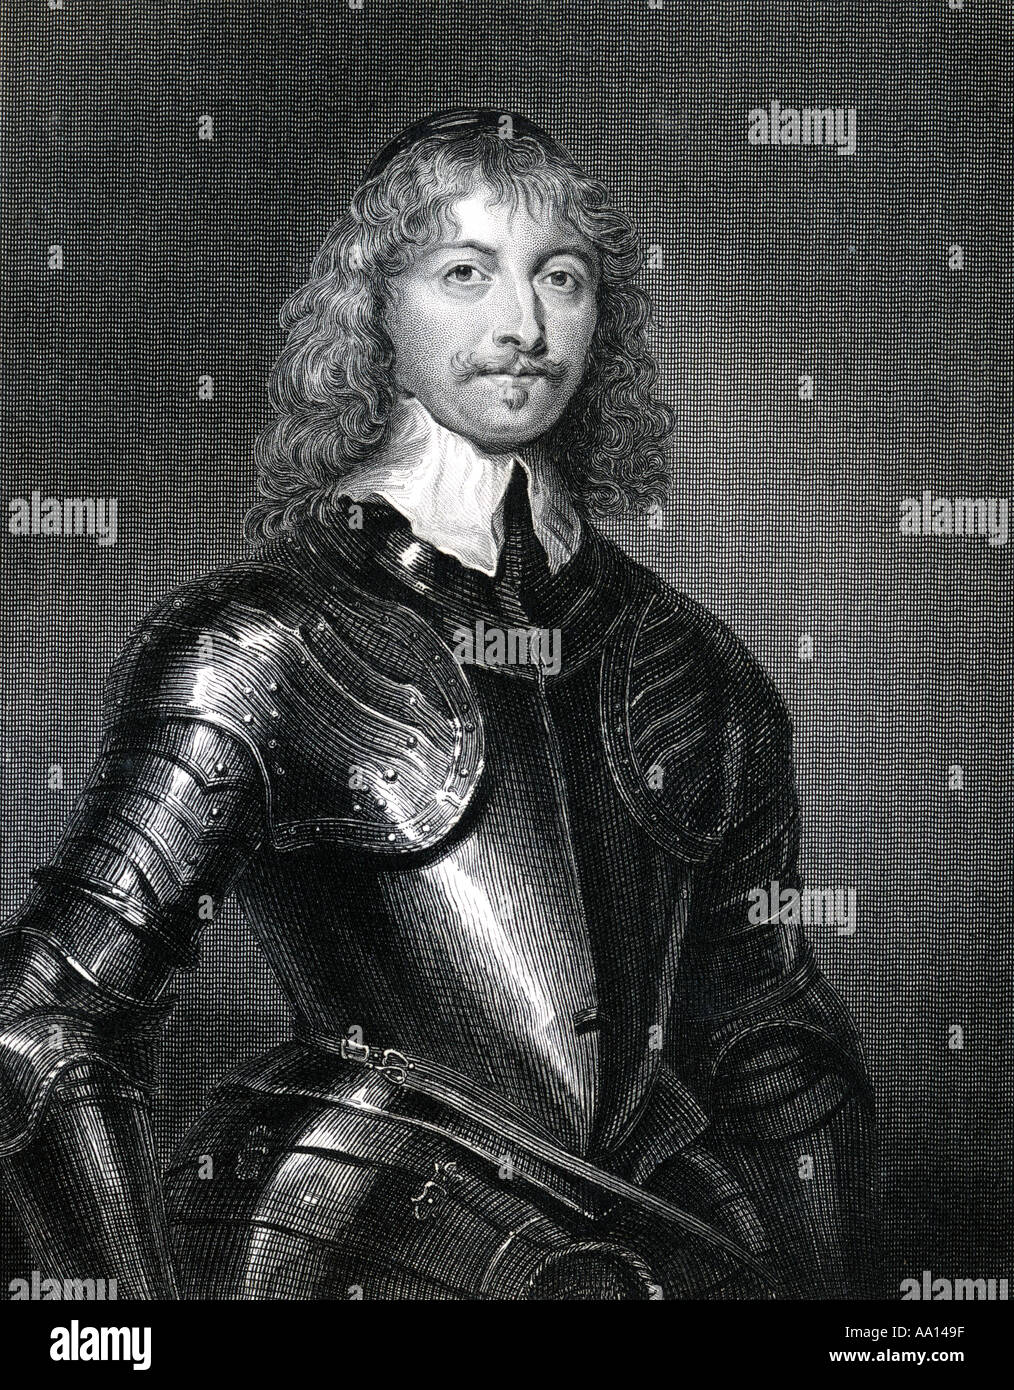 James Graham, 5th Earl and 1st Marquess of Montrose, Earl of Kincardine Lord Graham and Mugdock, 1612 - 1650.  Scottish nobleman, poet and soldier. Stock Photo